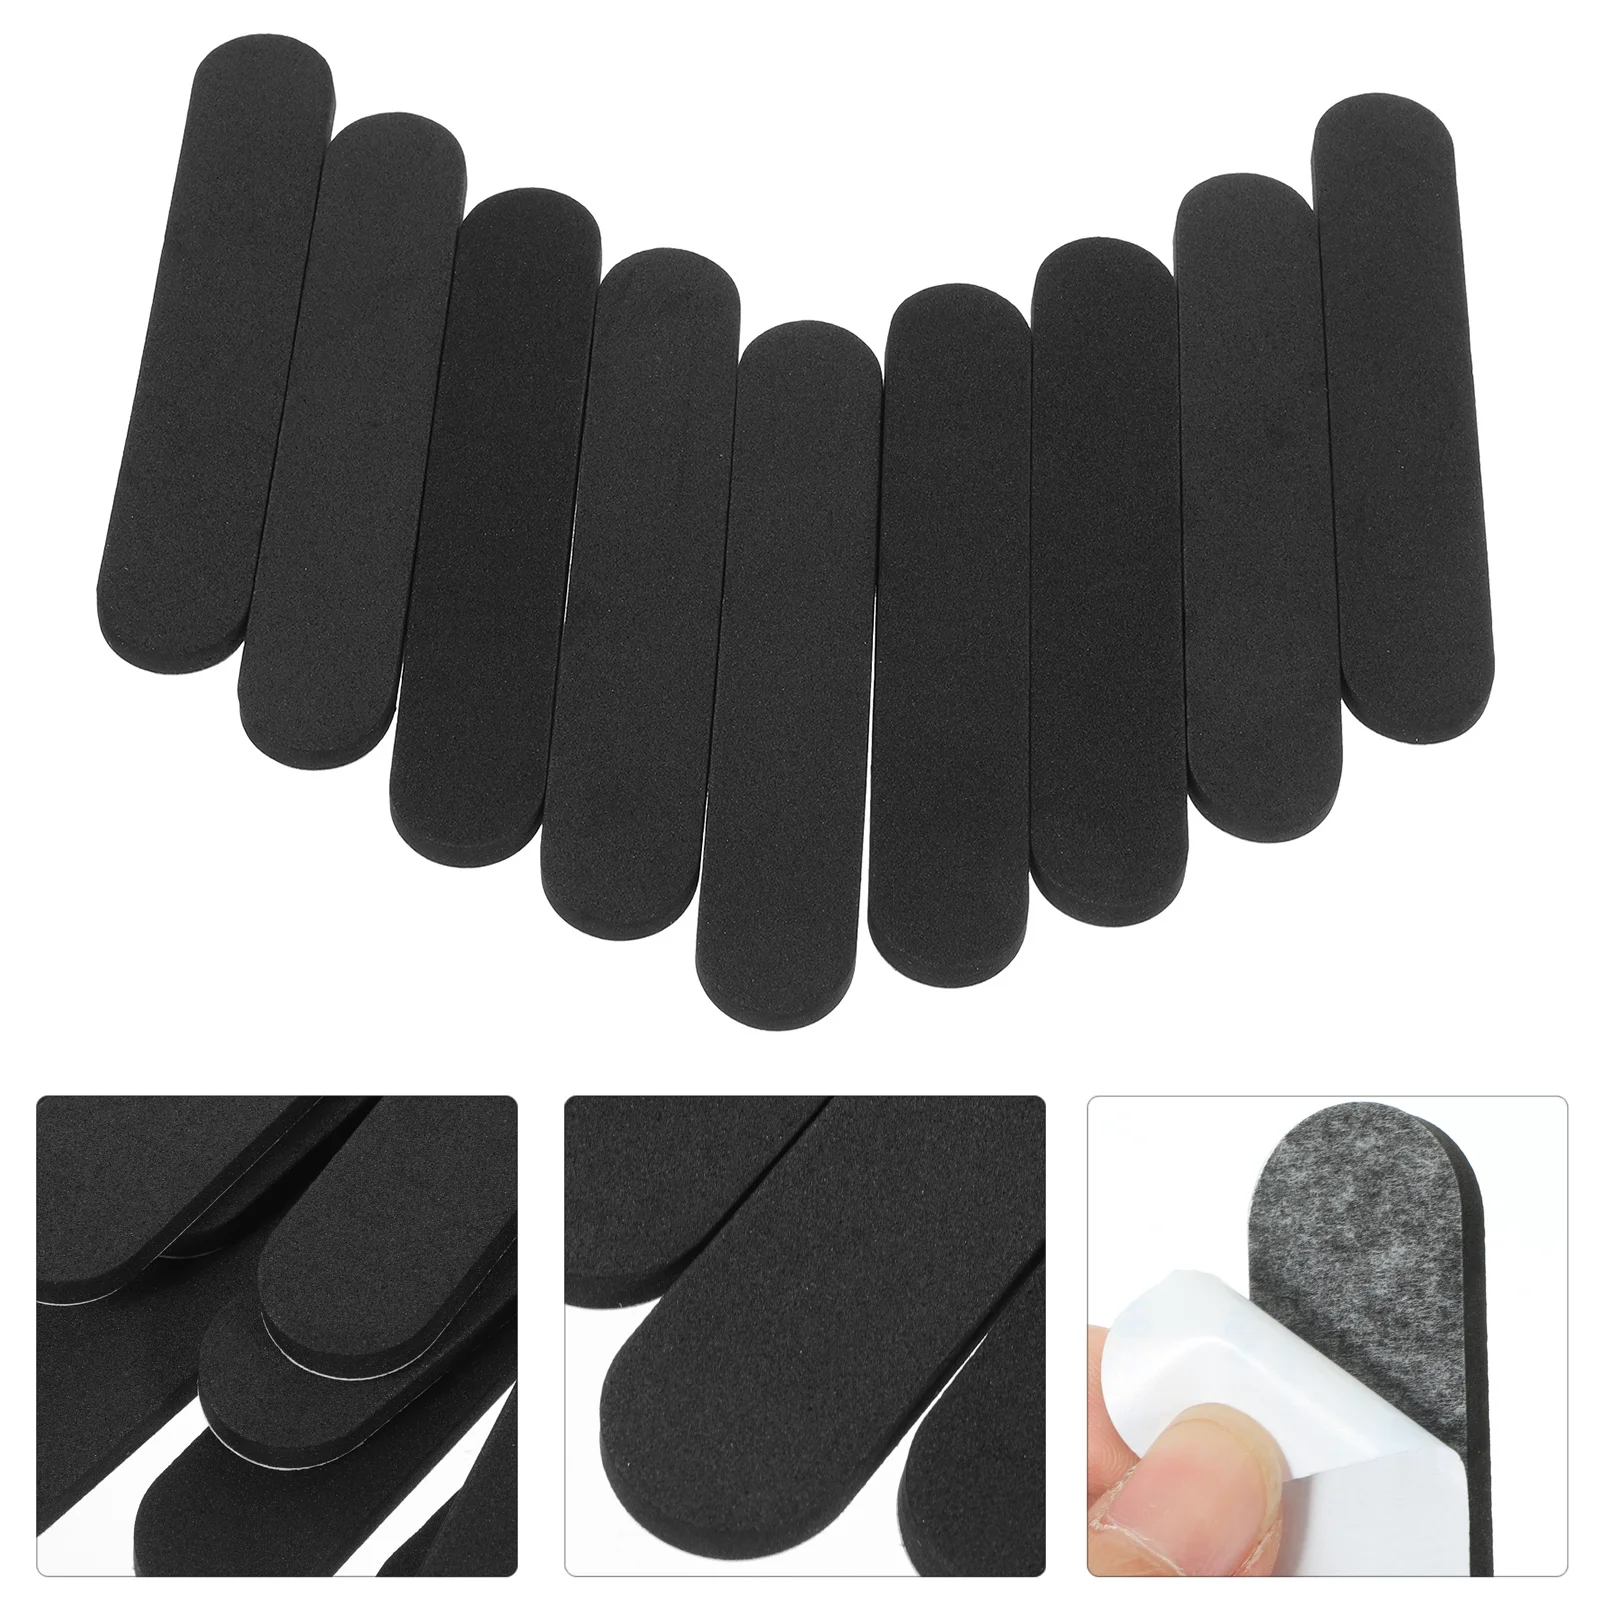 

10 Pcs Hat Size Reducing Tape Sizing Reducer Small Pad Inserts Make Fit Smaller Eva